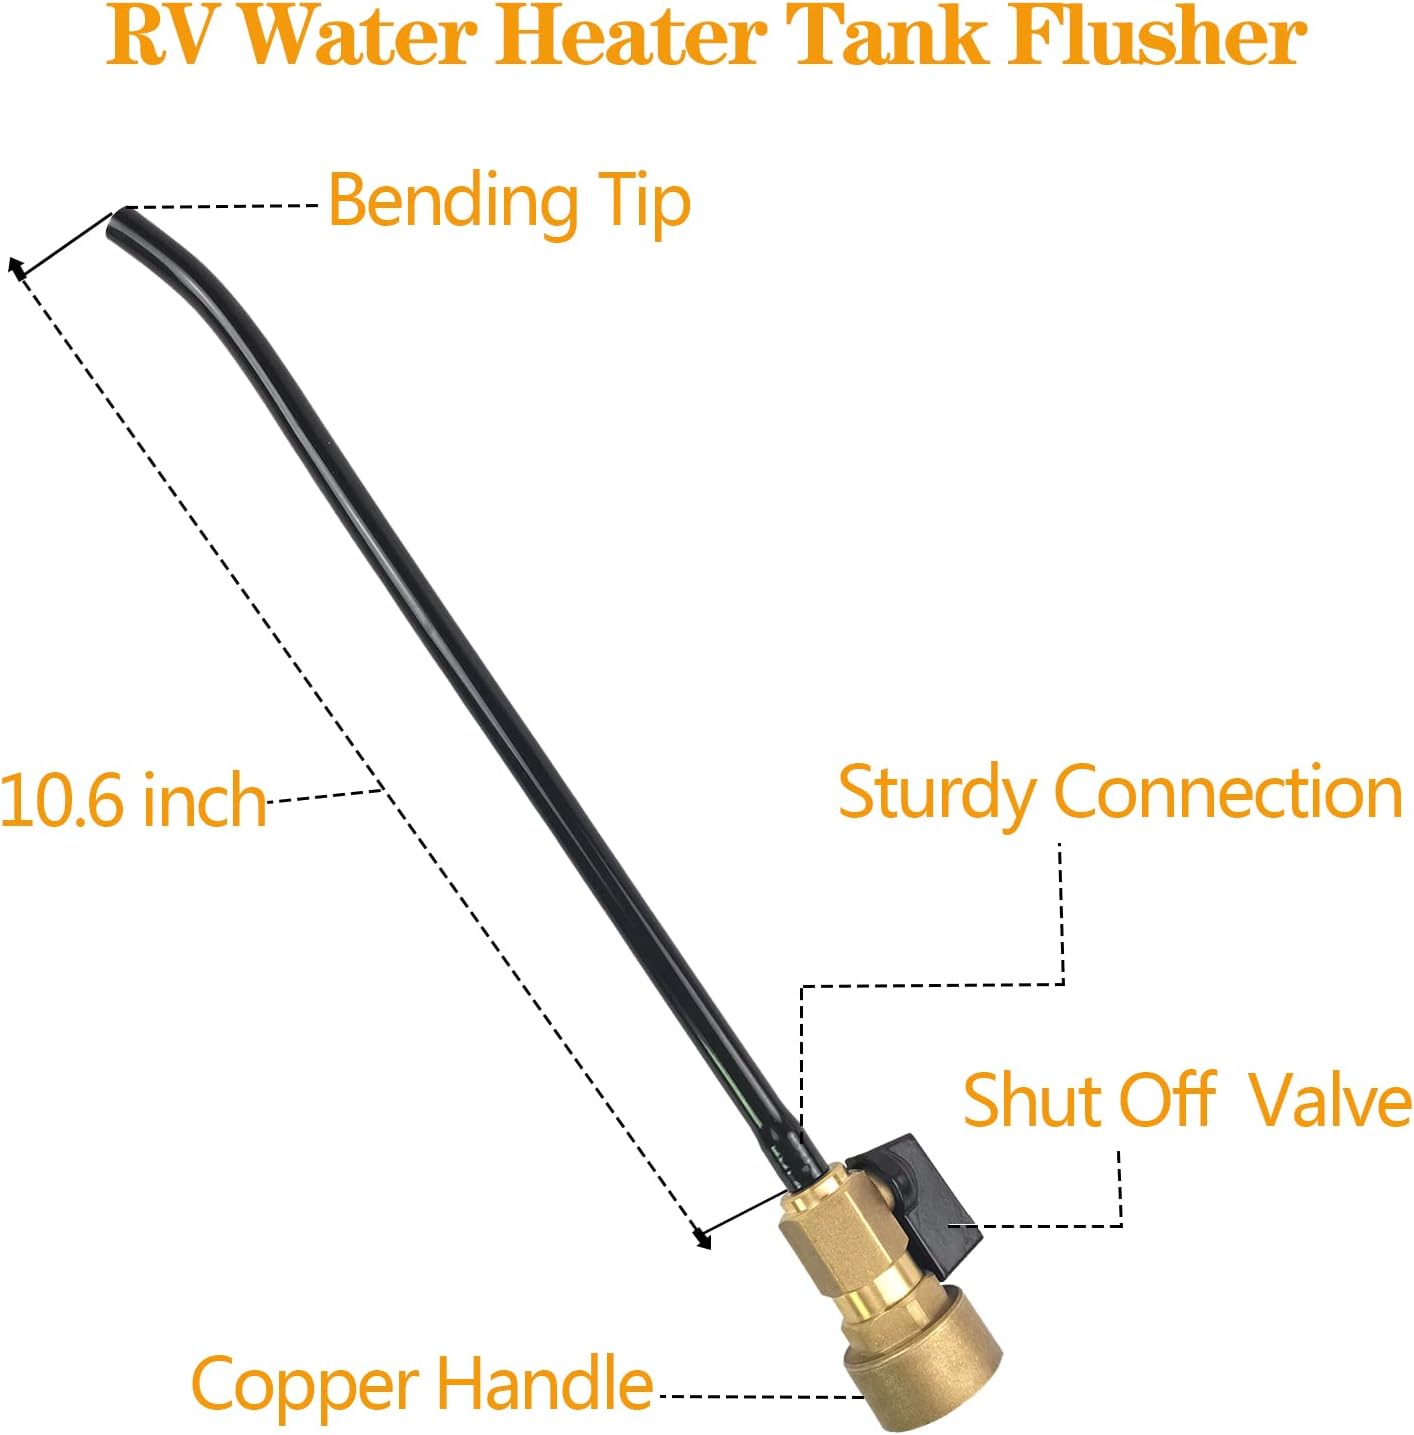 Copper RV Water Heater Tank Rinser Flusher with Bending Tip